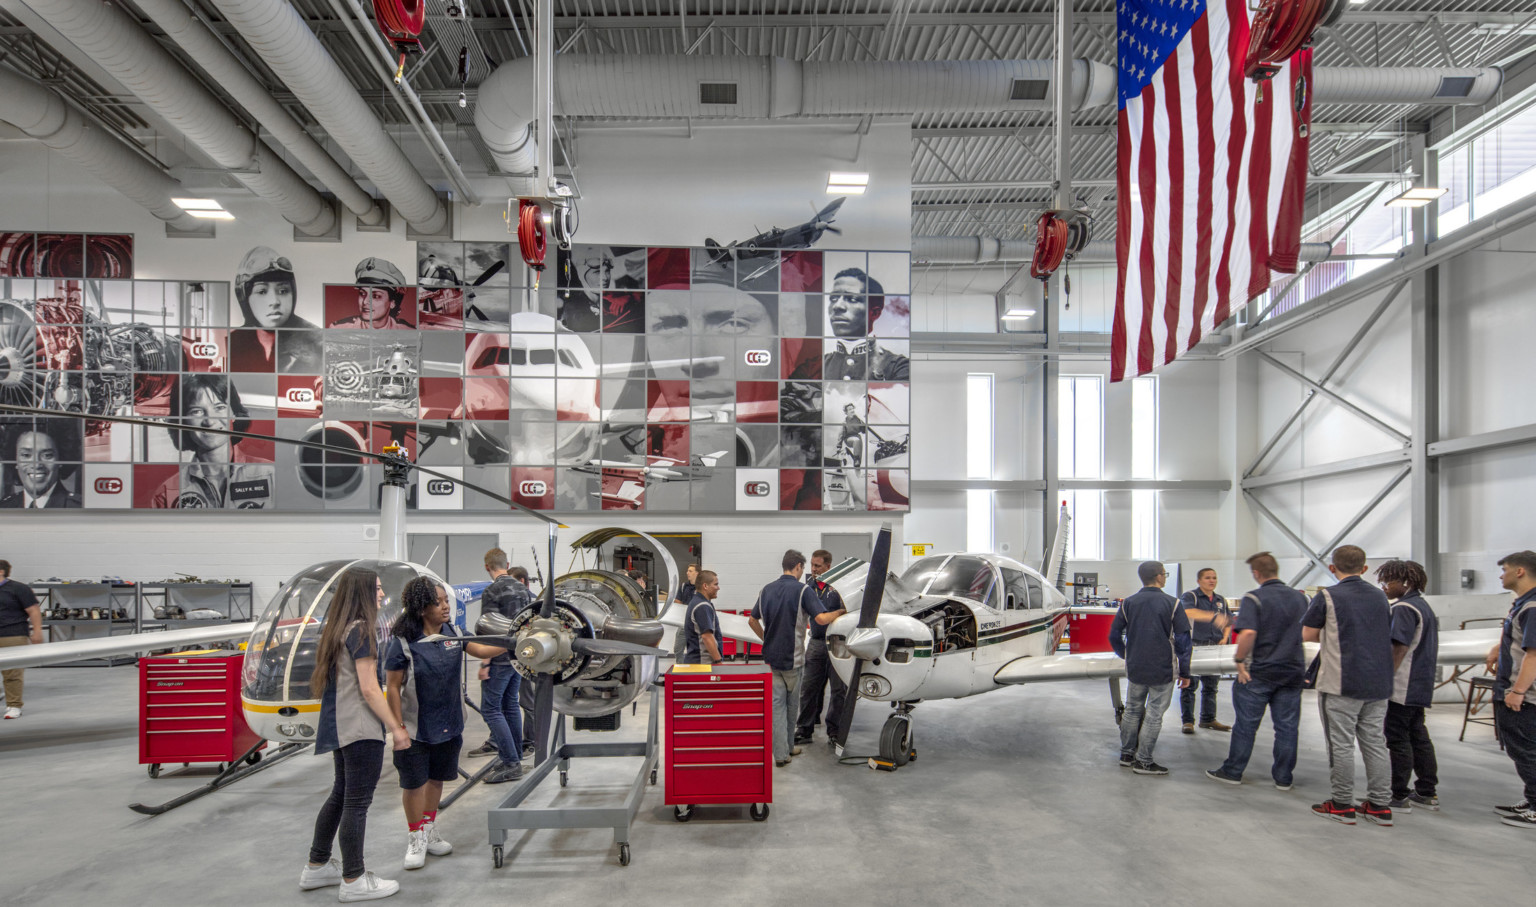 Aviation lab with helicopter, small plane, and displayed engine. Mural at back with planes and pilots. American flag, right